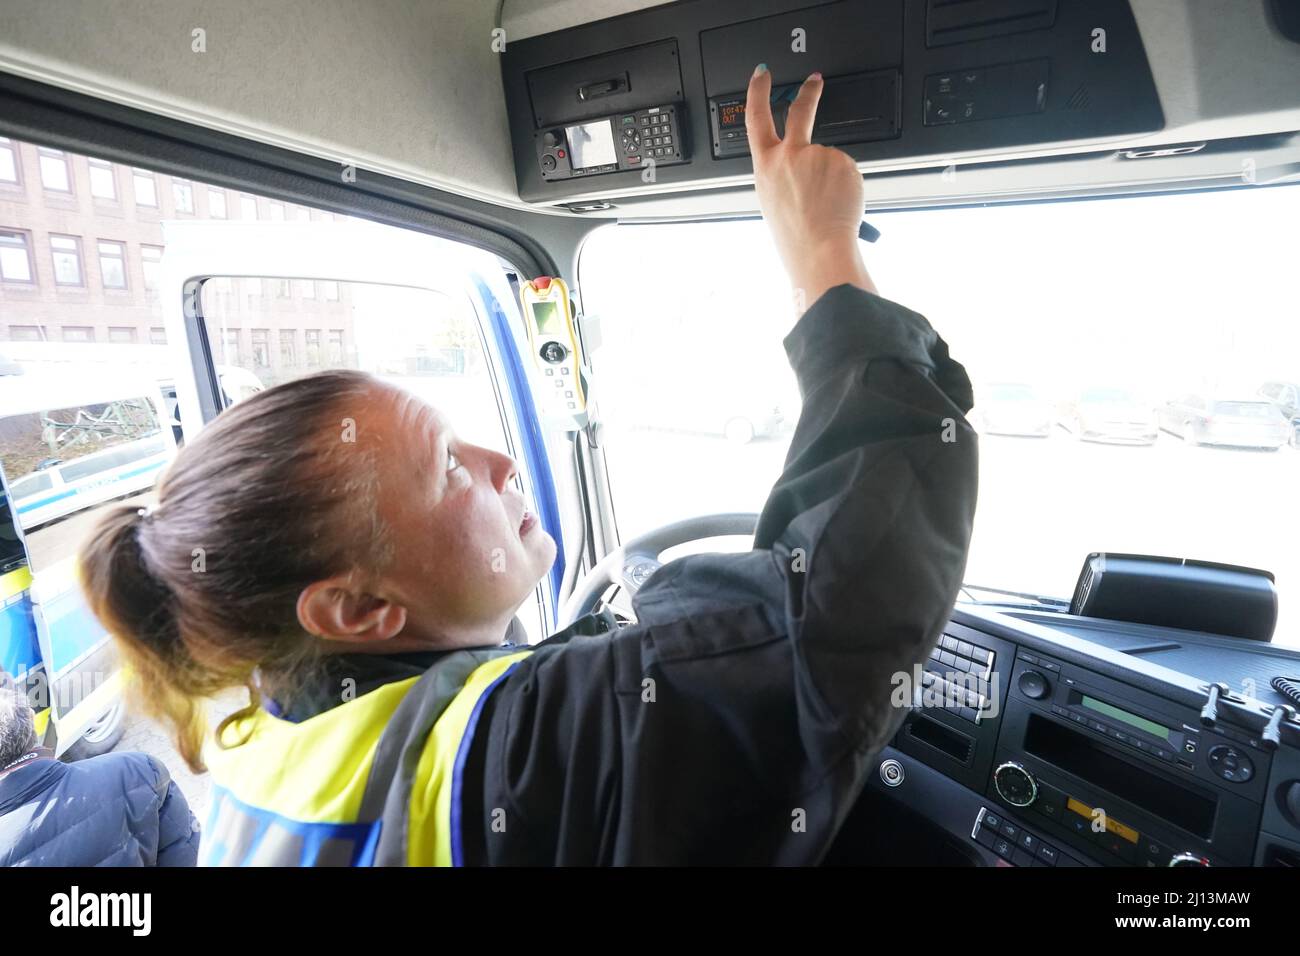 Hamburg, Germany. 22nd Mar, 2022. Maren Ilic, a member of the 'Heavy Duty Control Group' (VD 4), checks the tachograph of a truck during a press event. The police's new special unit has put a new heavy-load control vehicle into service. The task force vehicle is equipped with special devices and materials to check vehicles weighing tons in freight and heavy goods traffic. Credit: Marcus Brandt/dpa/Alamy Live News Stock Photo